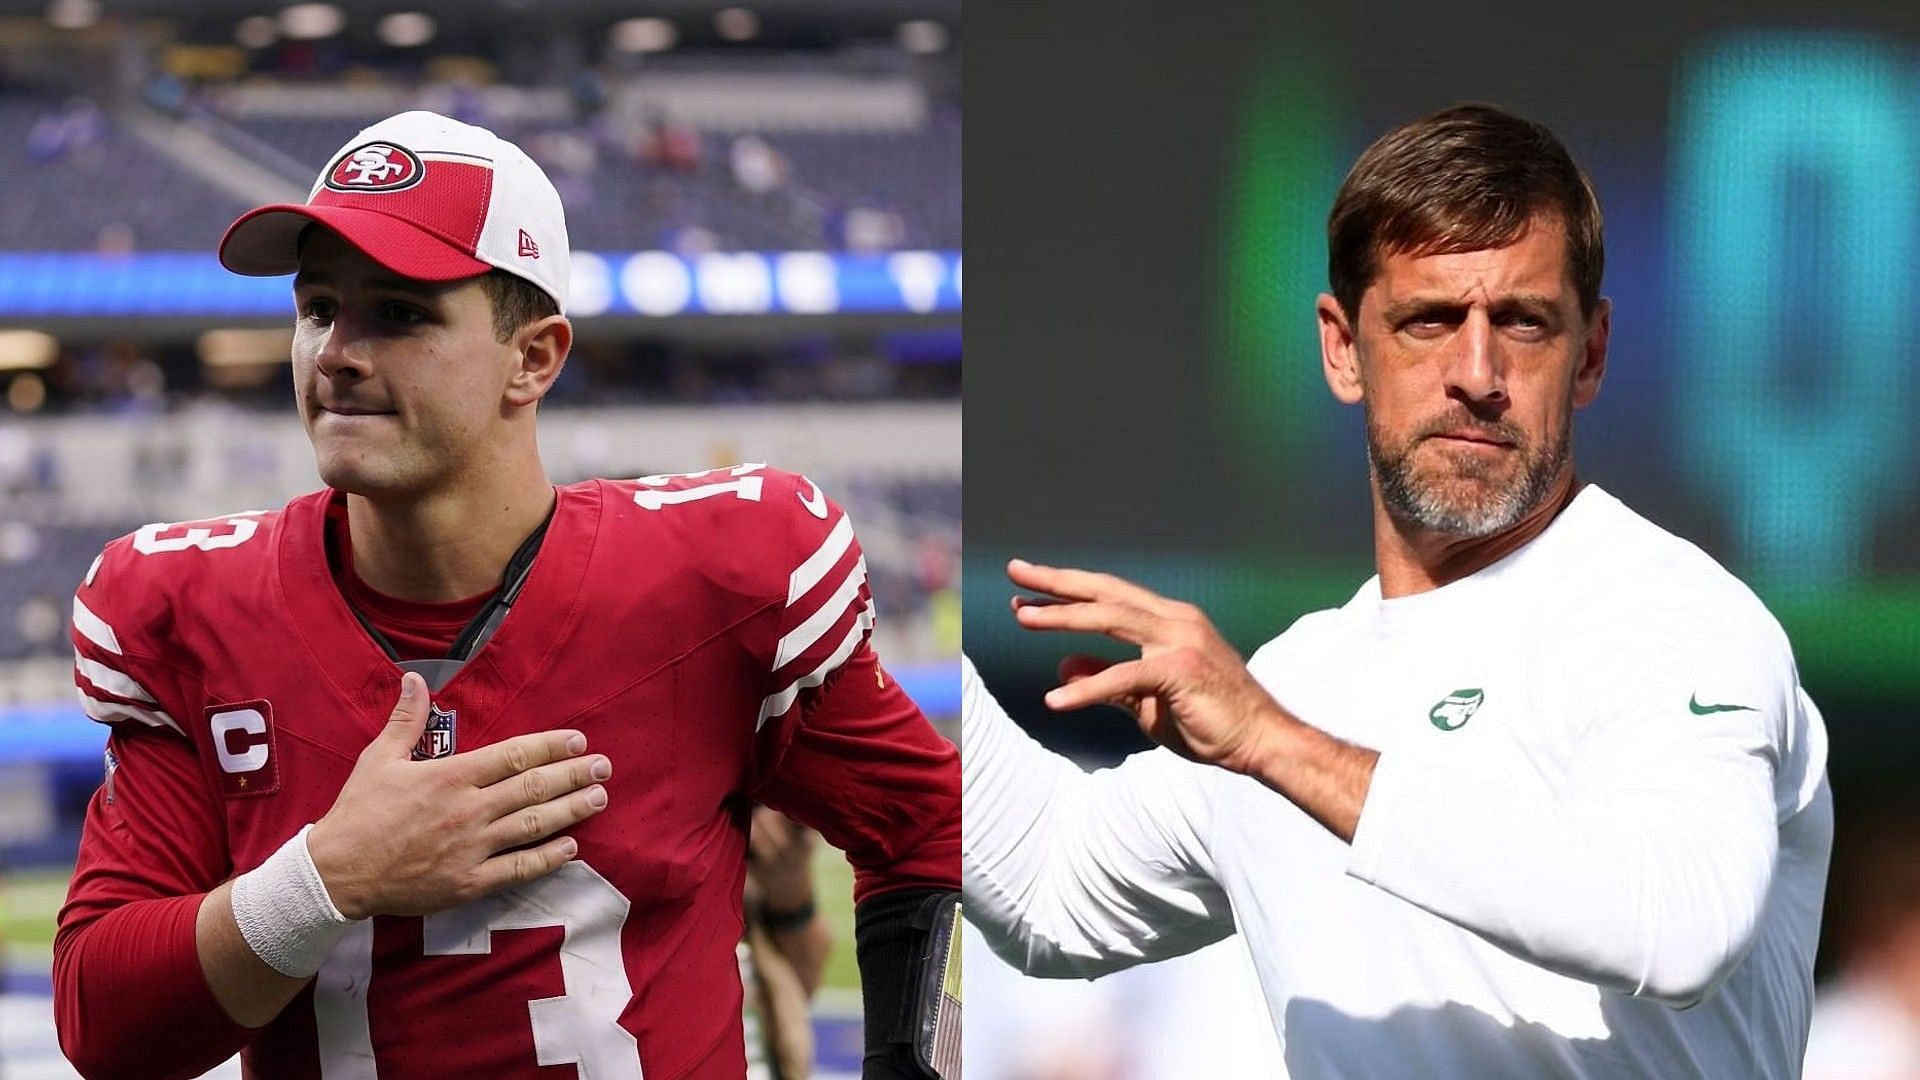 NFL analyst reveals bizarre Aaron Rodgers-like conspiracy theory about 49ers QB Brock Purdy after Chargers robots show up at Week 1 game